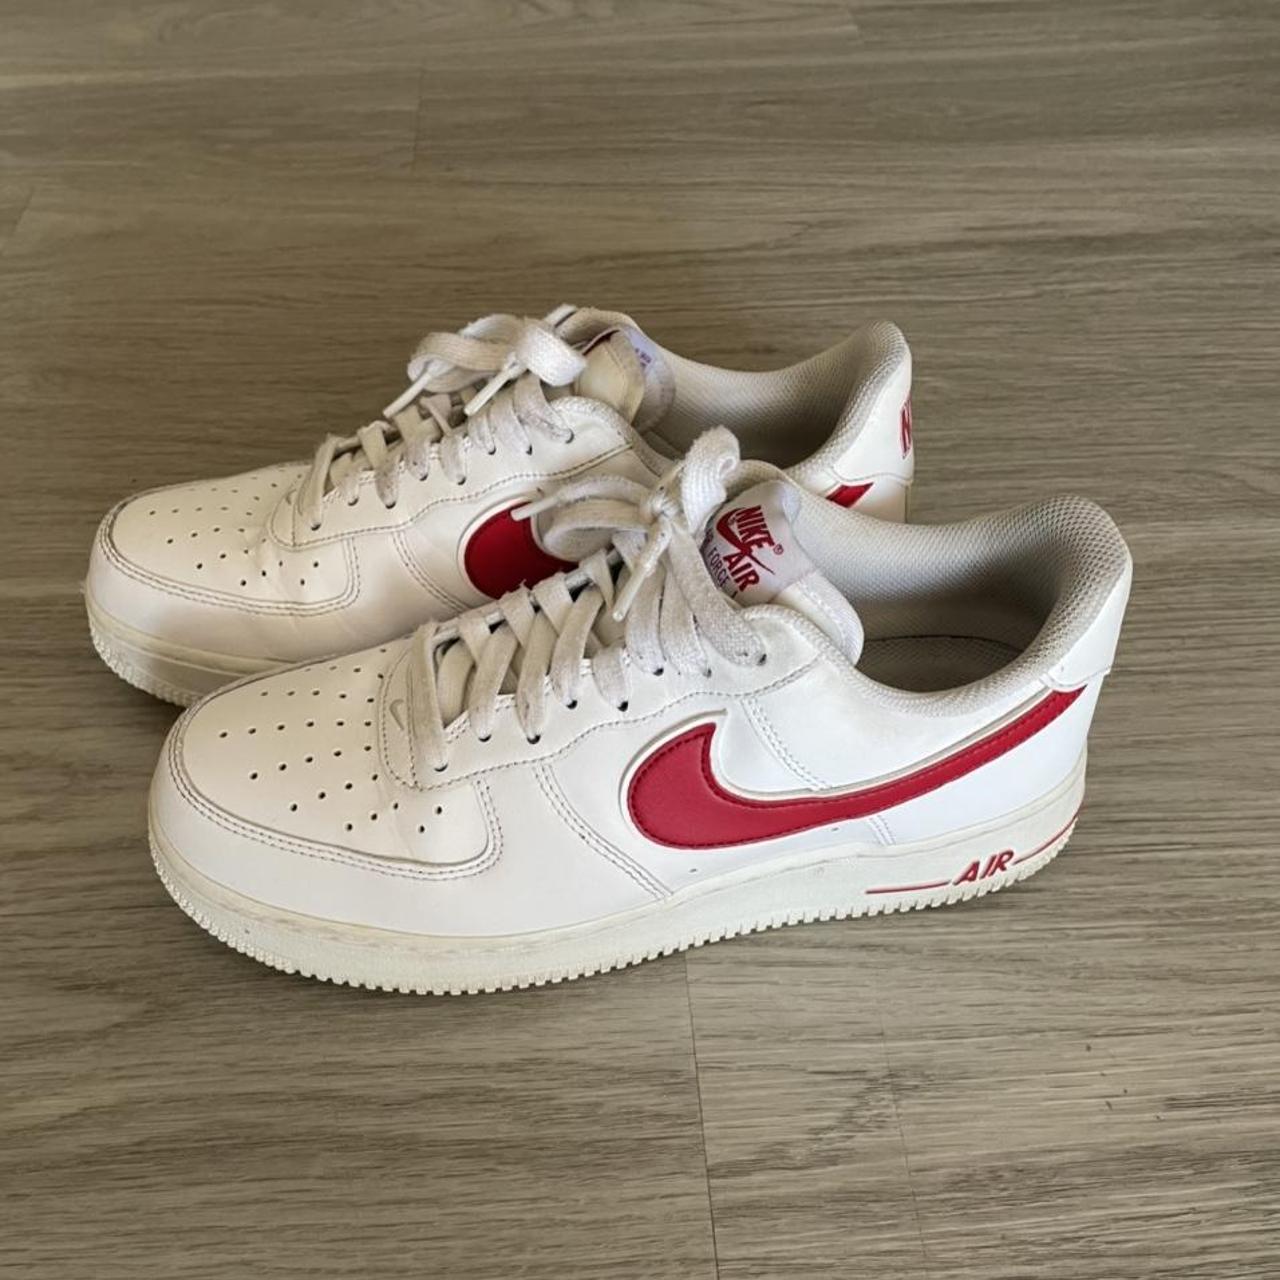 Vintage Nike Air Force Ones 7/10 condition due to... - Depop